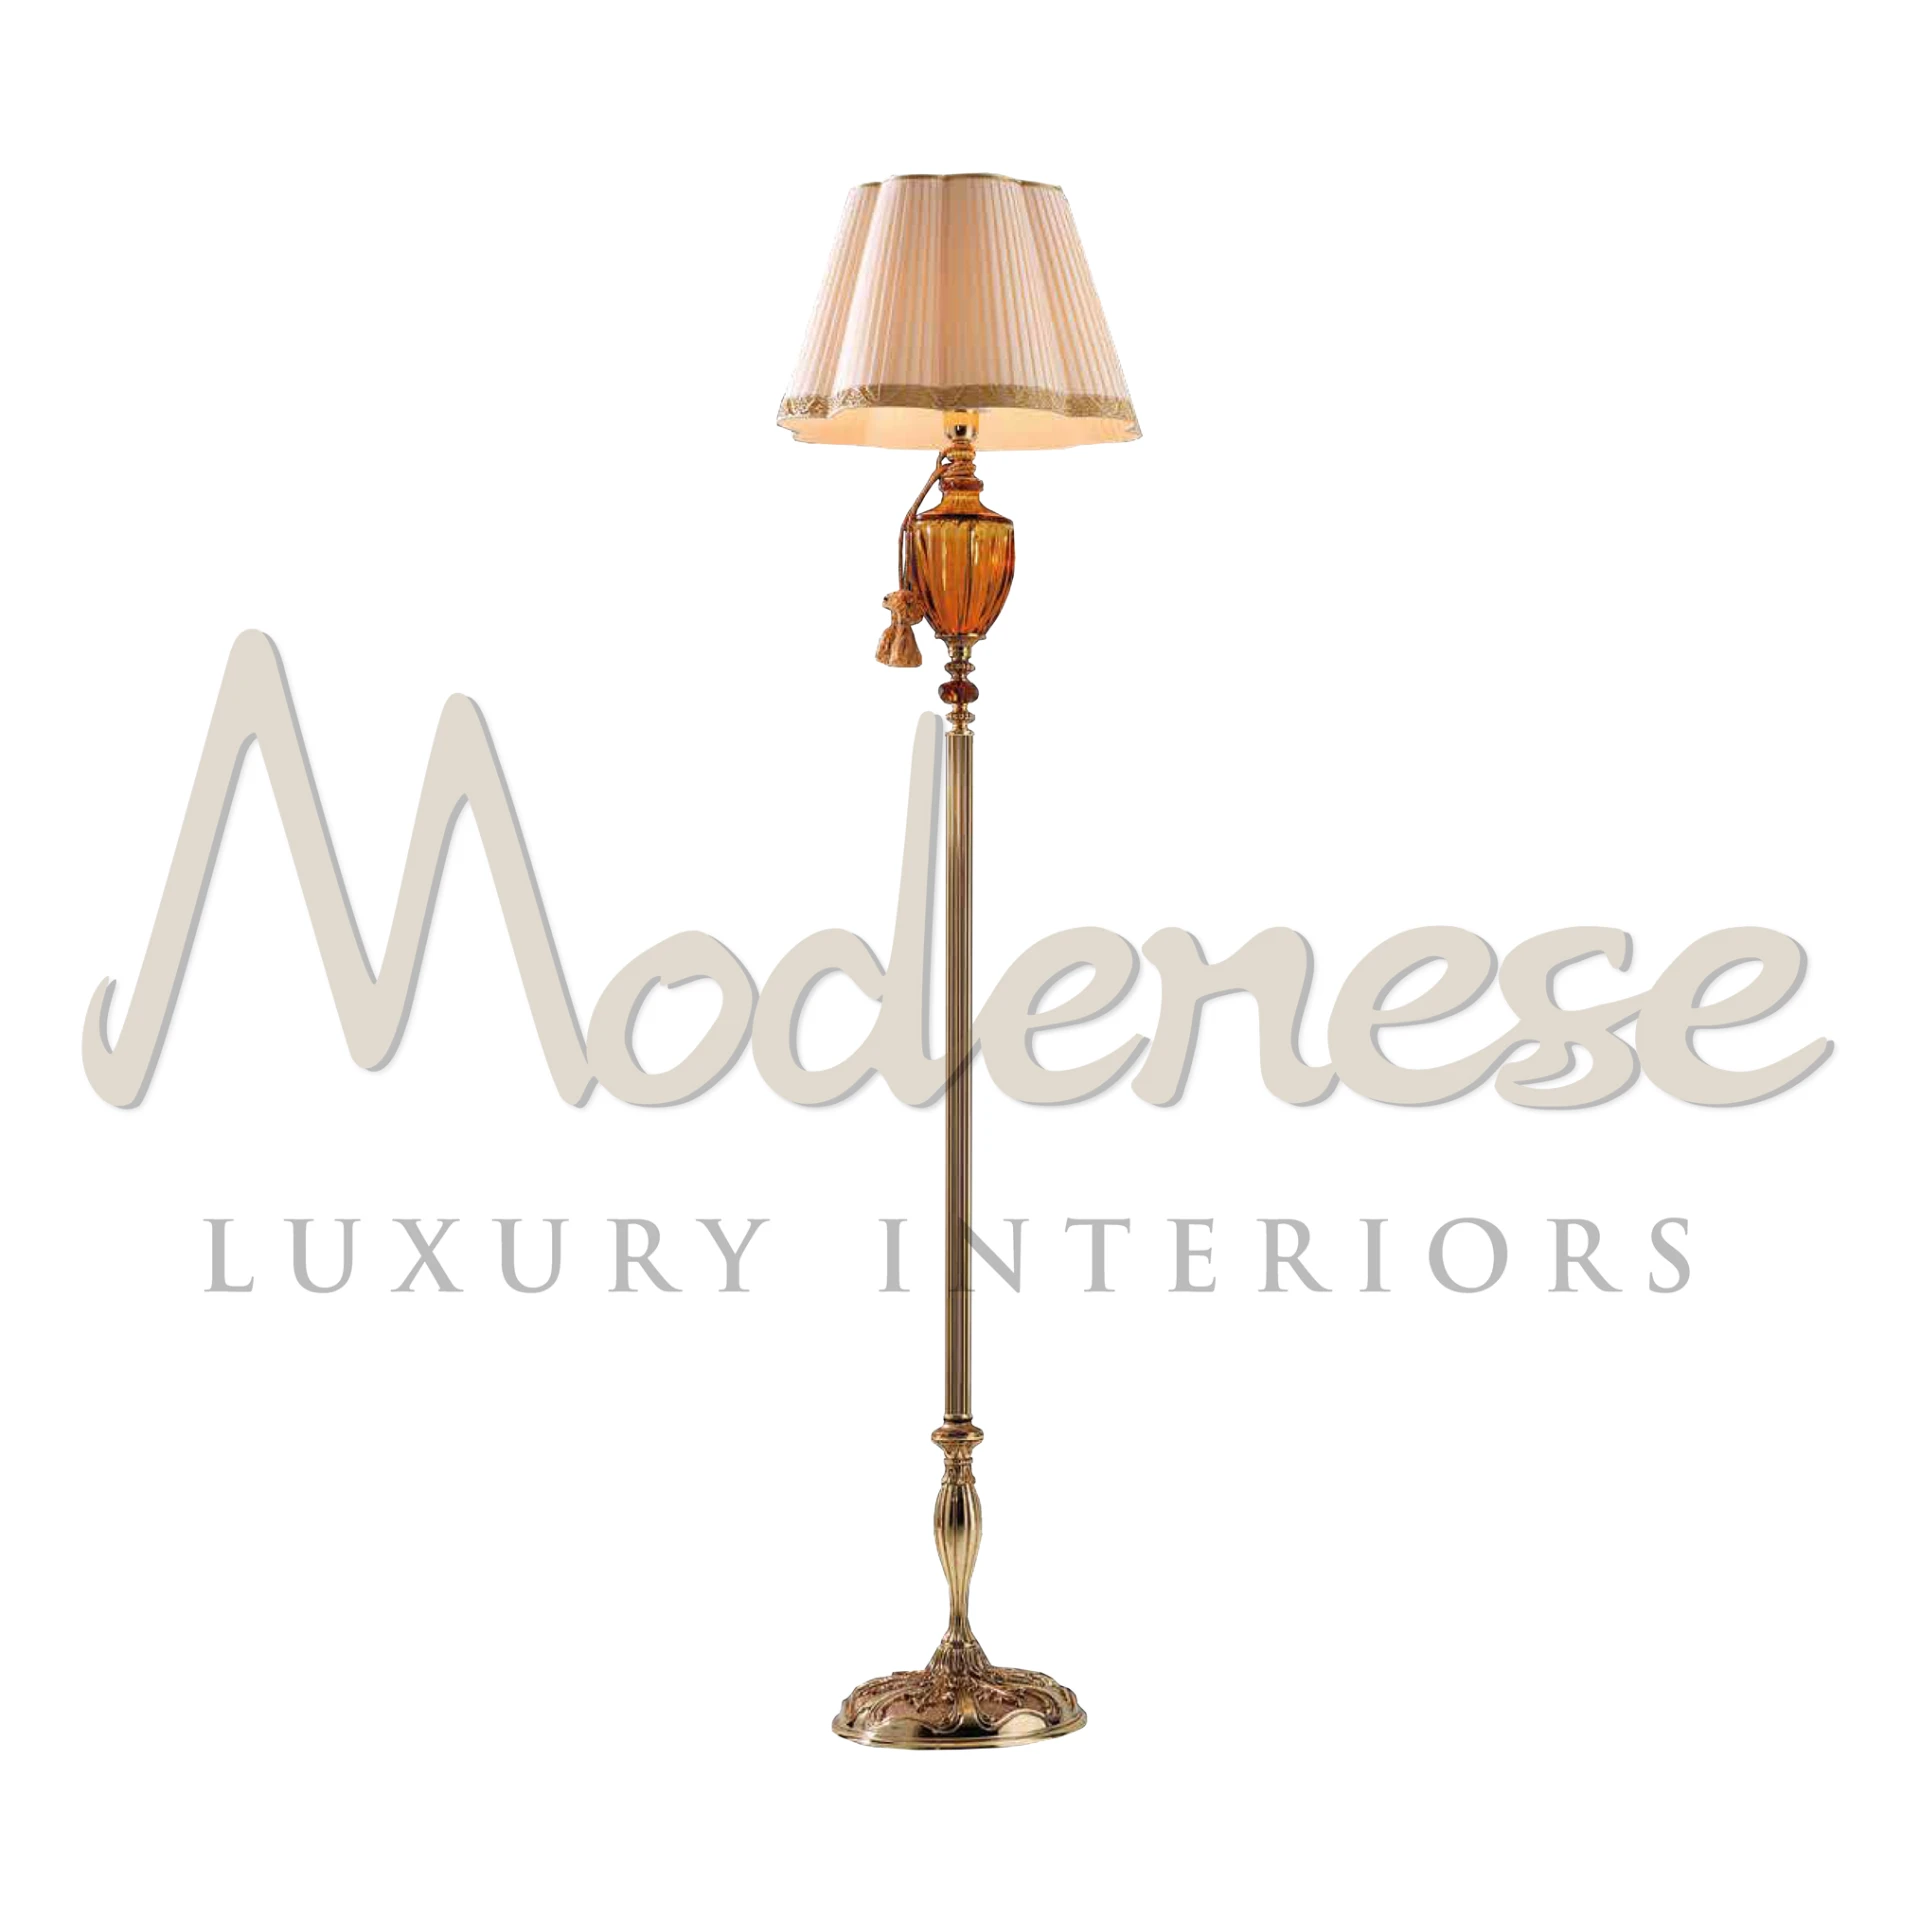 Modenese’s' Topaz Glass Floor Lamp featuring an elegant bronze stand and topaz glass.